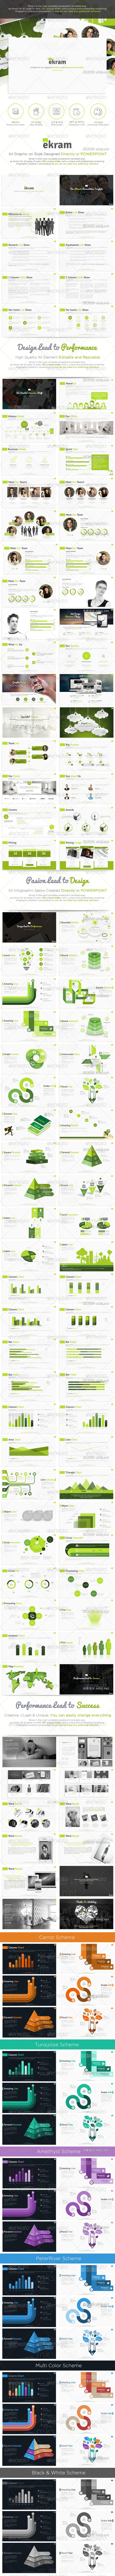 PPT模板 ekram the most complete powerpoint template